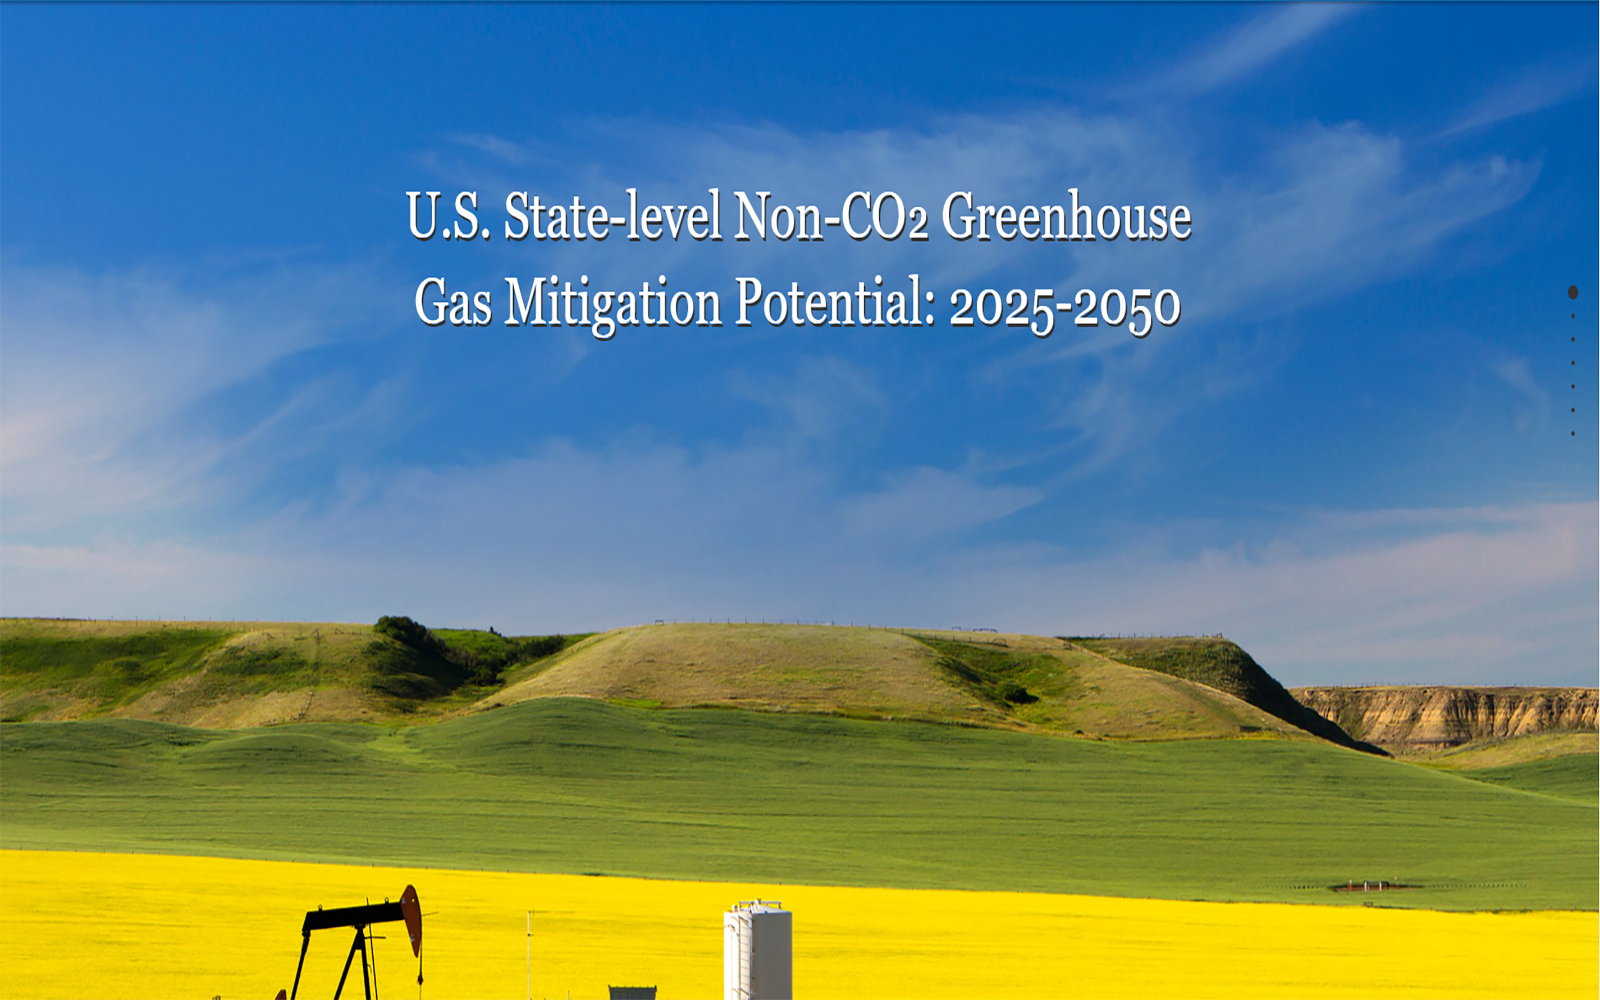 Text superimposed on a green field near a refinery: U.S. State-Level Non-CO2 Greenhouse Gas Mitigation Potential, 2025-2050